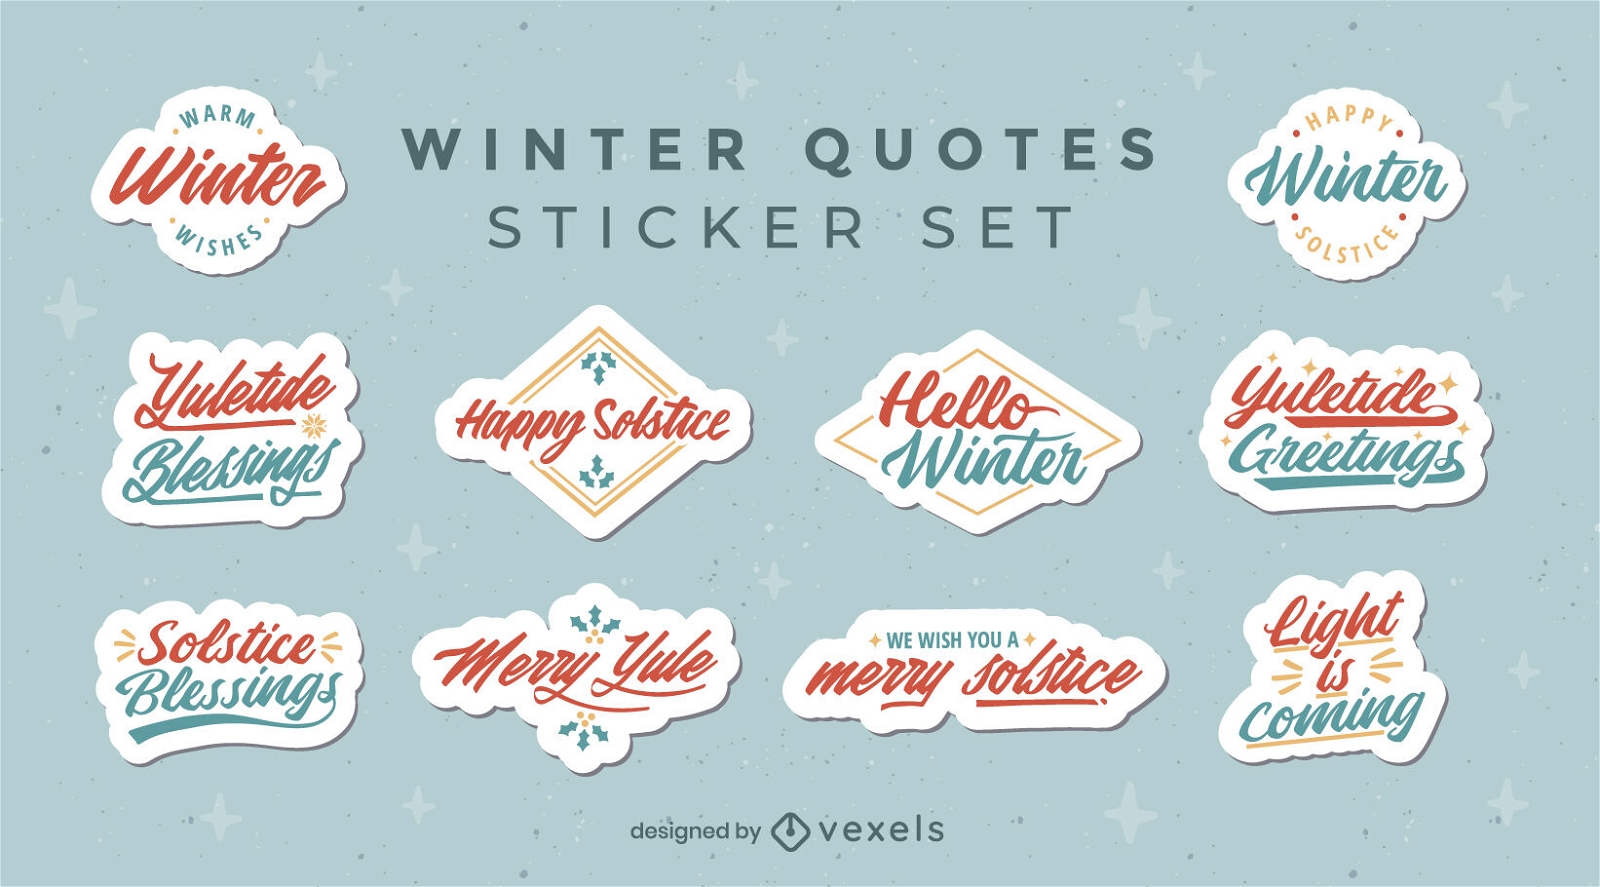 Winter quotes stickers set